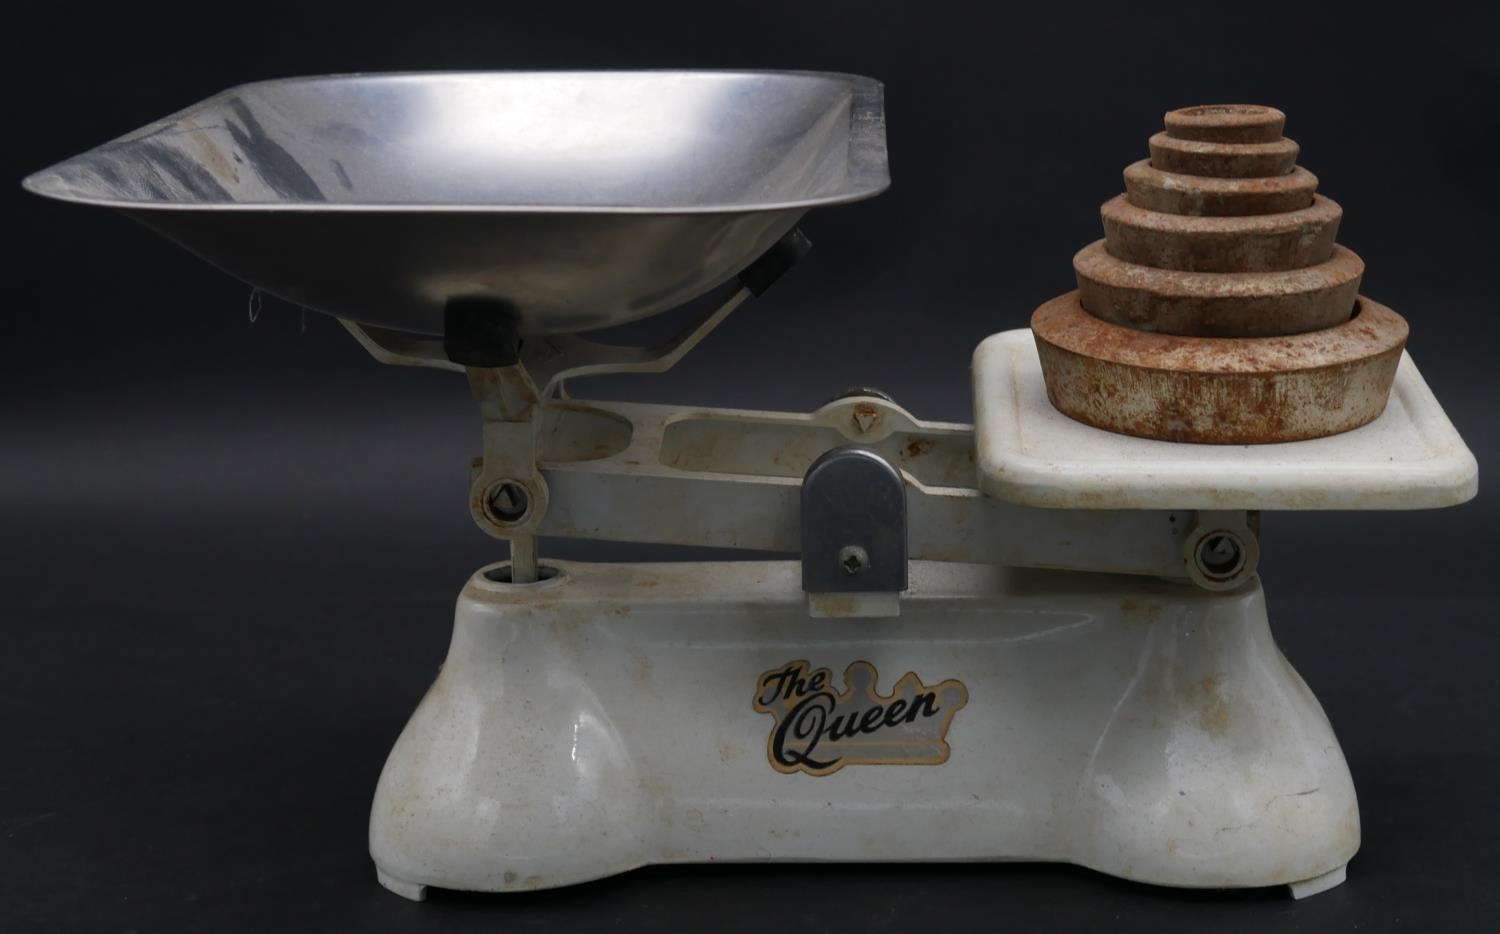 A pair of vintage 'The Queen' Weylux shop scales with weights along with an Arts and Crafts copper - Image 5 of 6